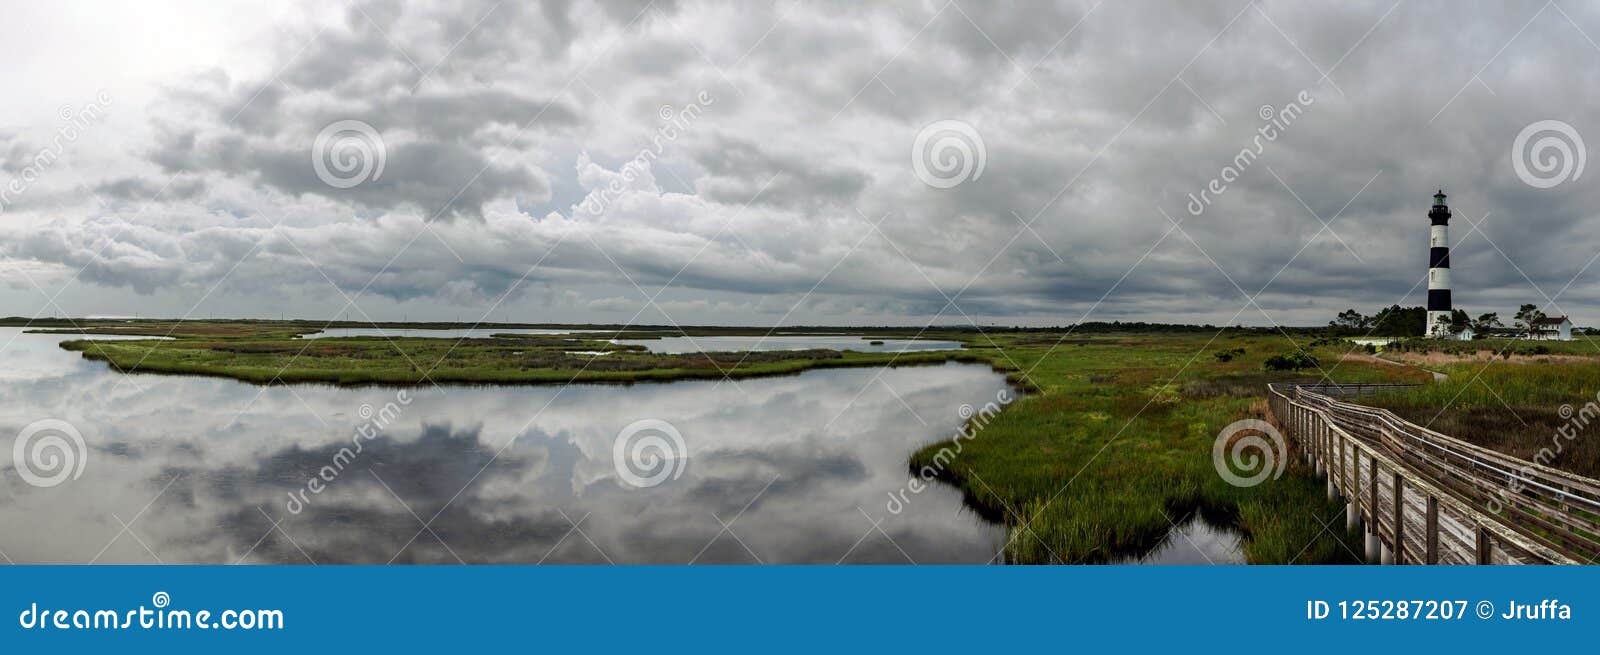 panoramic view of lighthouse and surrounding marshlands